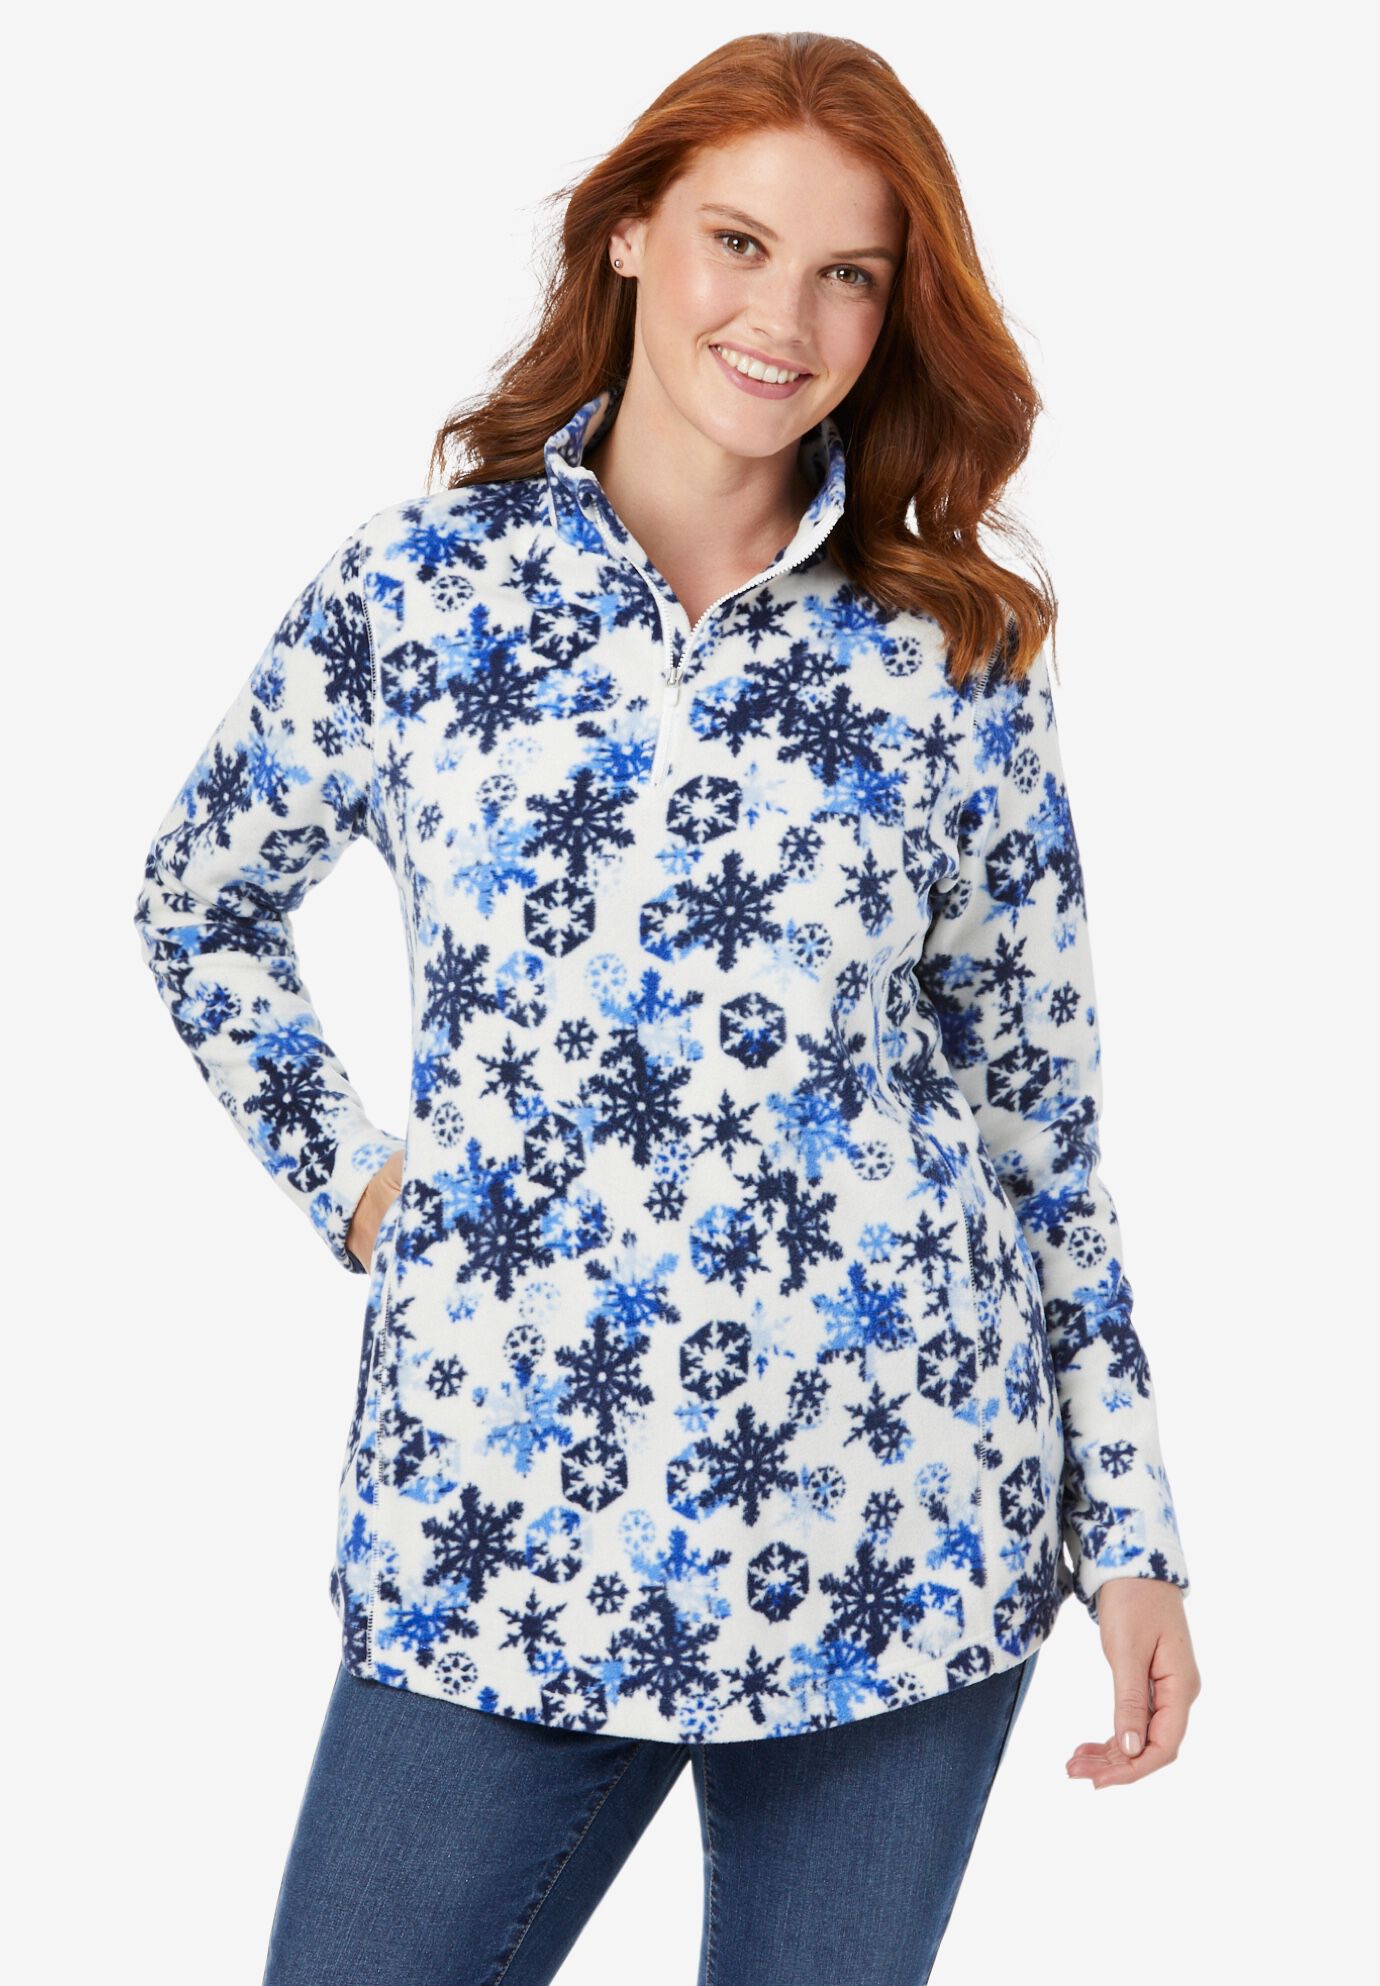 woman within women's plus size clothing